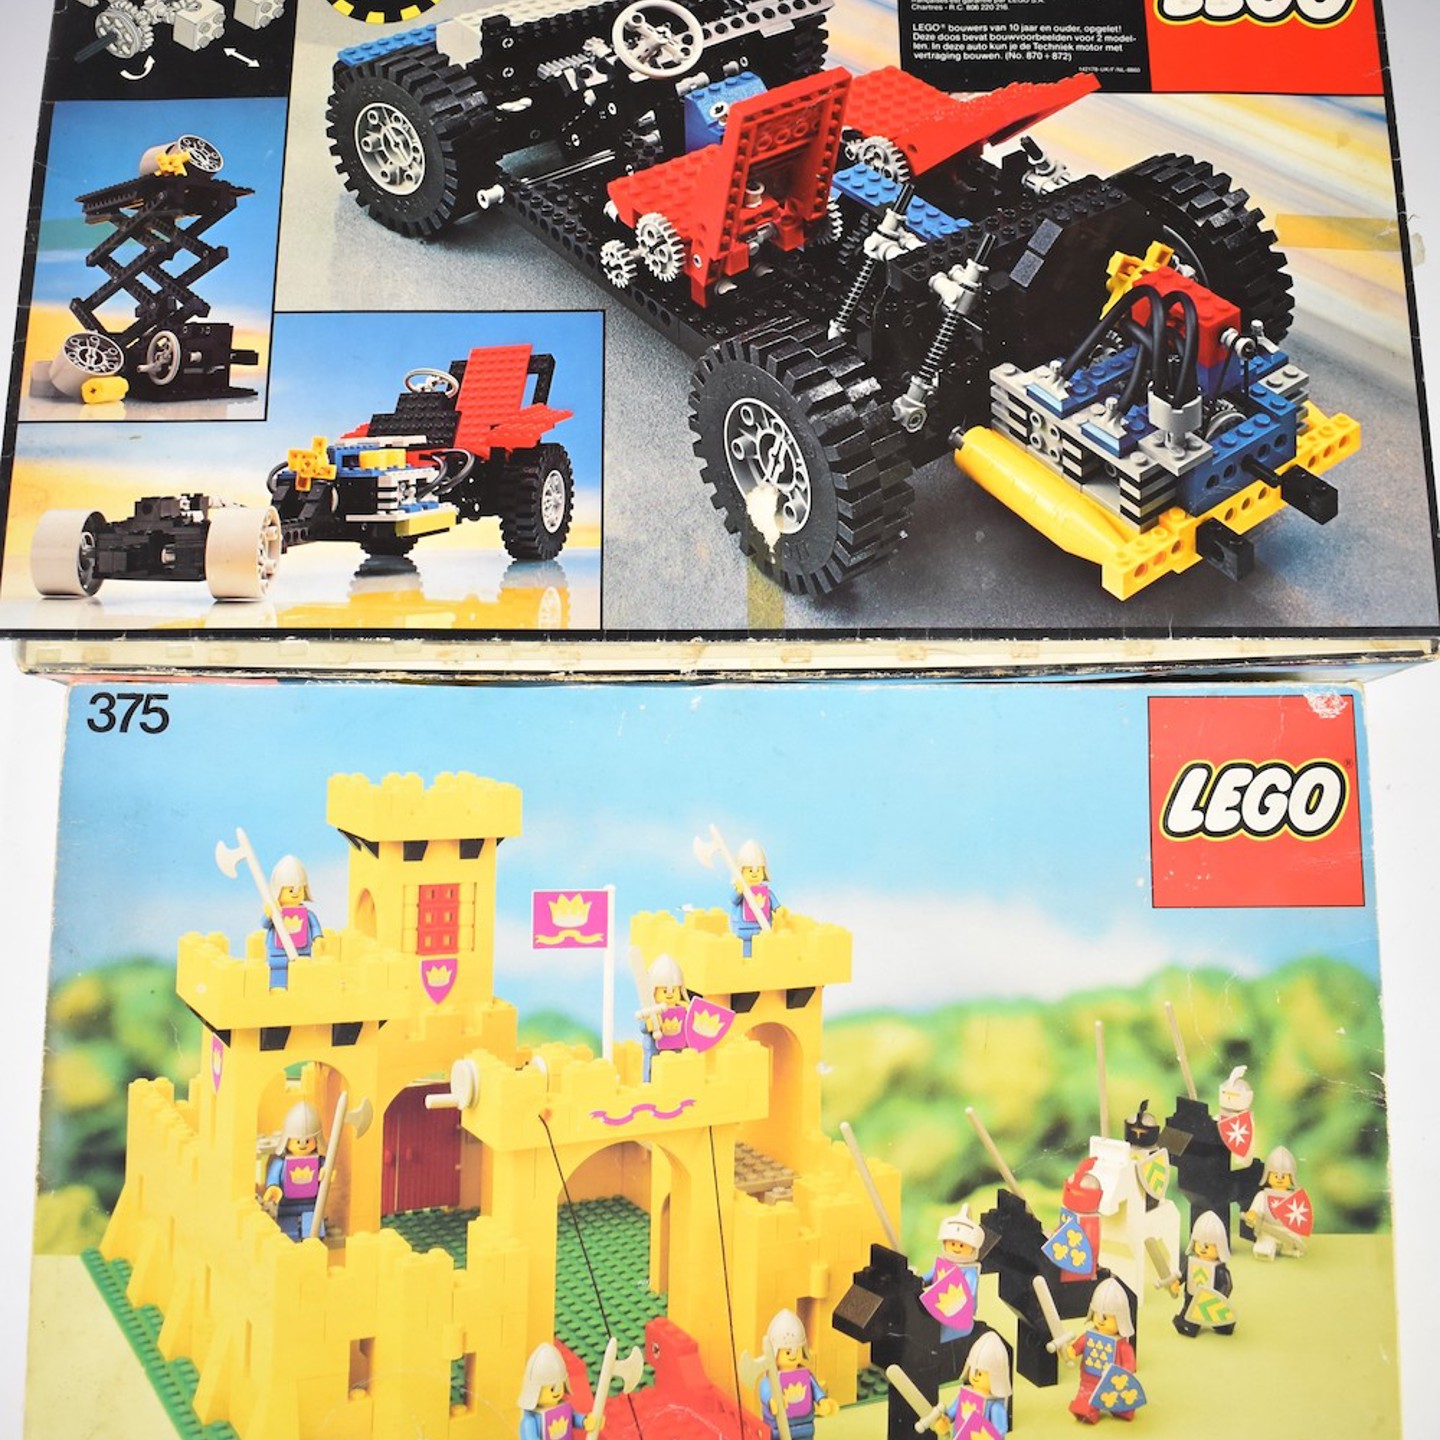 Two Lego Model Construction Sets Castle Building Set, 375, 1978 And Lego Technic Car Chassis, 8860, 1980, Both In Original Boxes. Sold £260